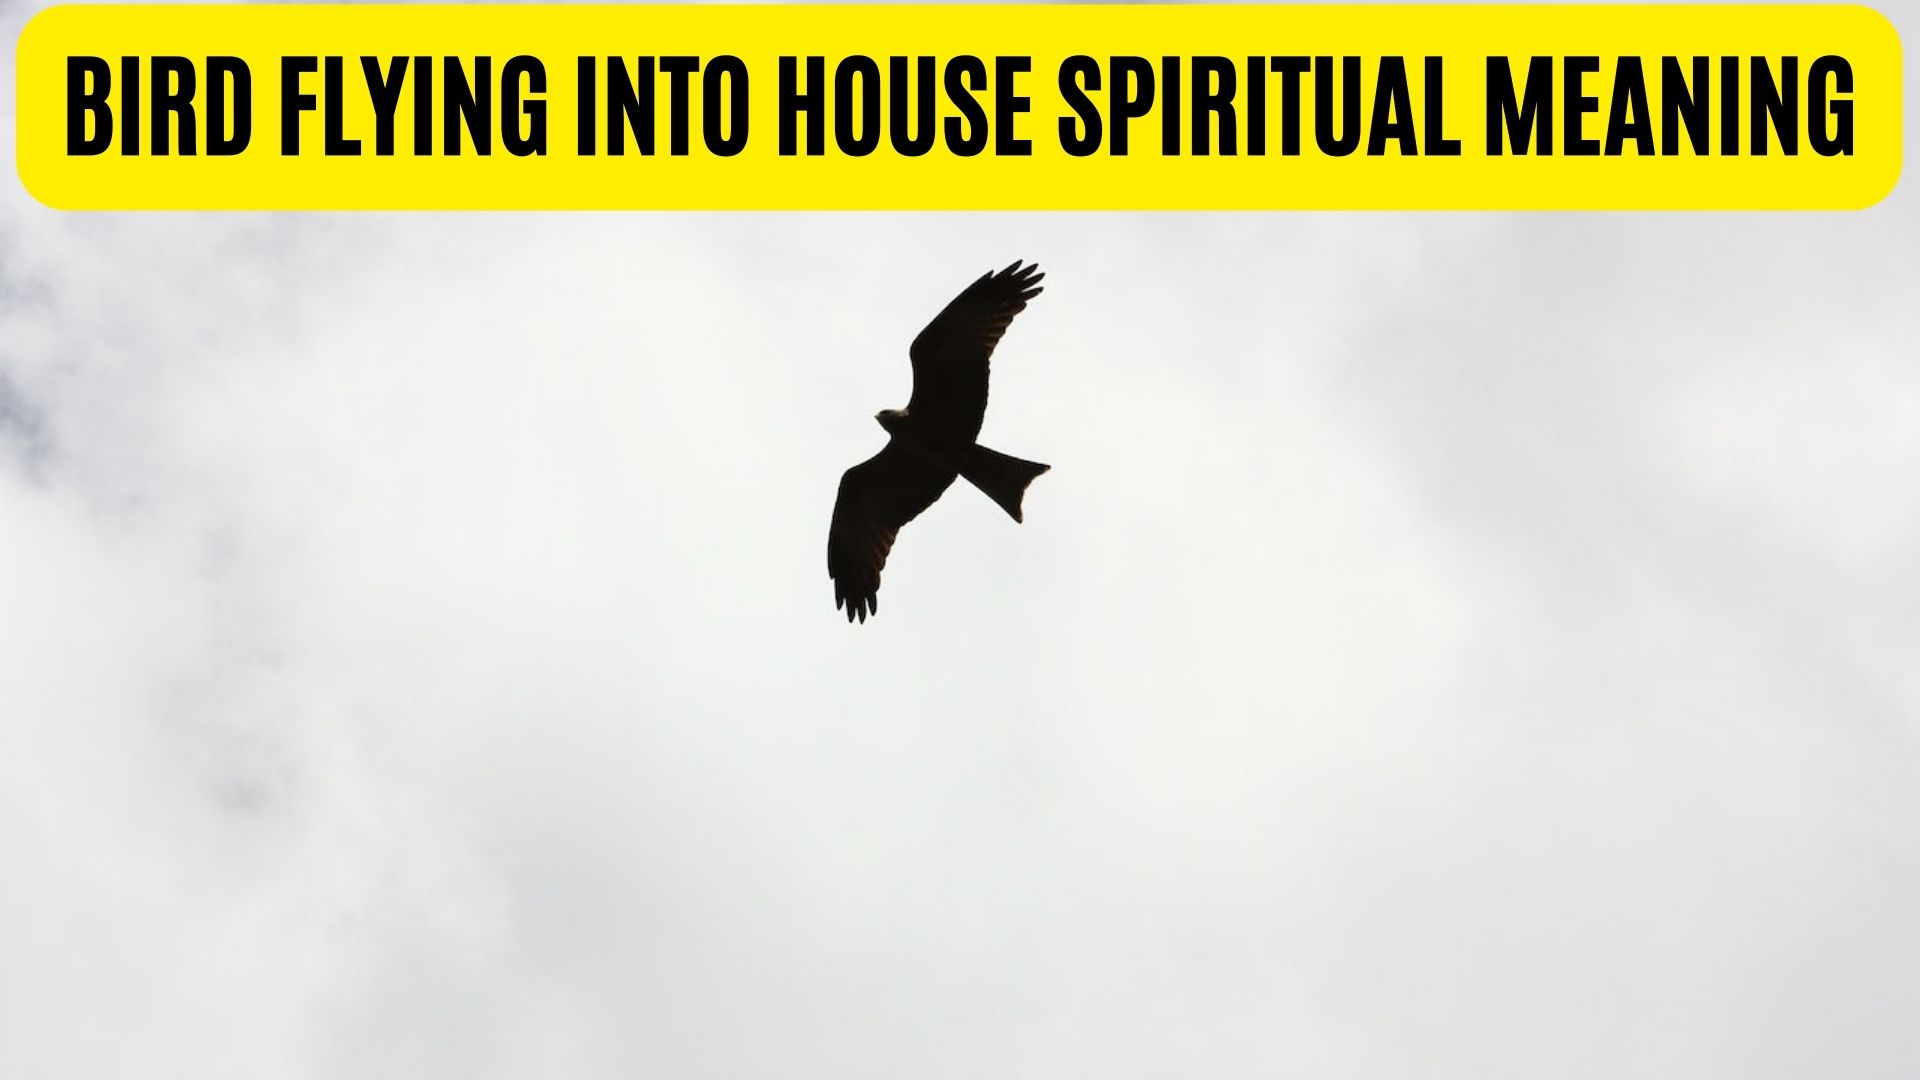 Bird Flying Into House Spiritual Meaning Represents Good Luck And Blessings